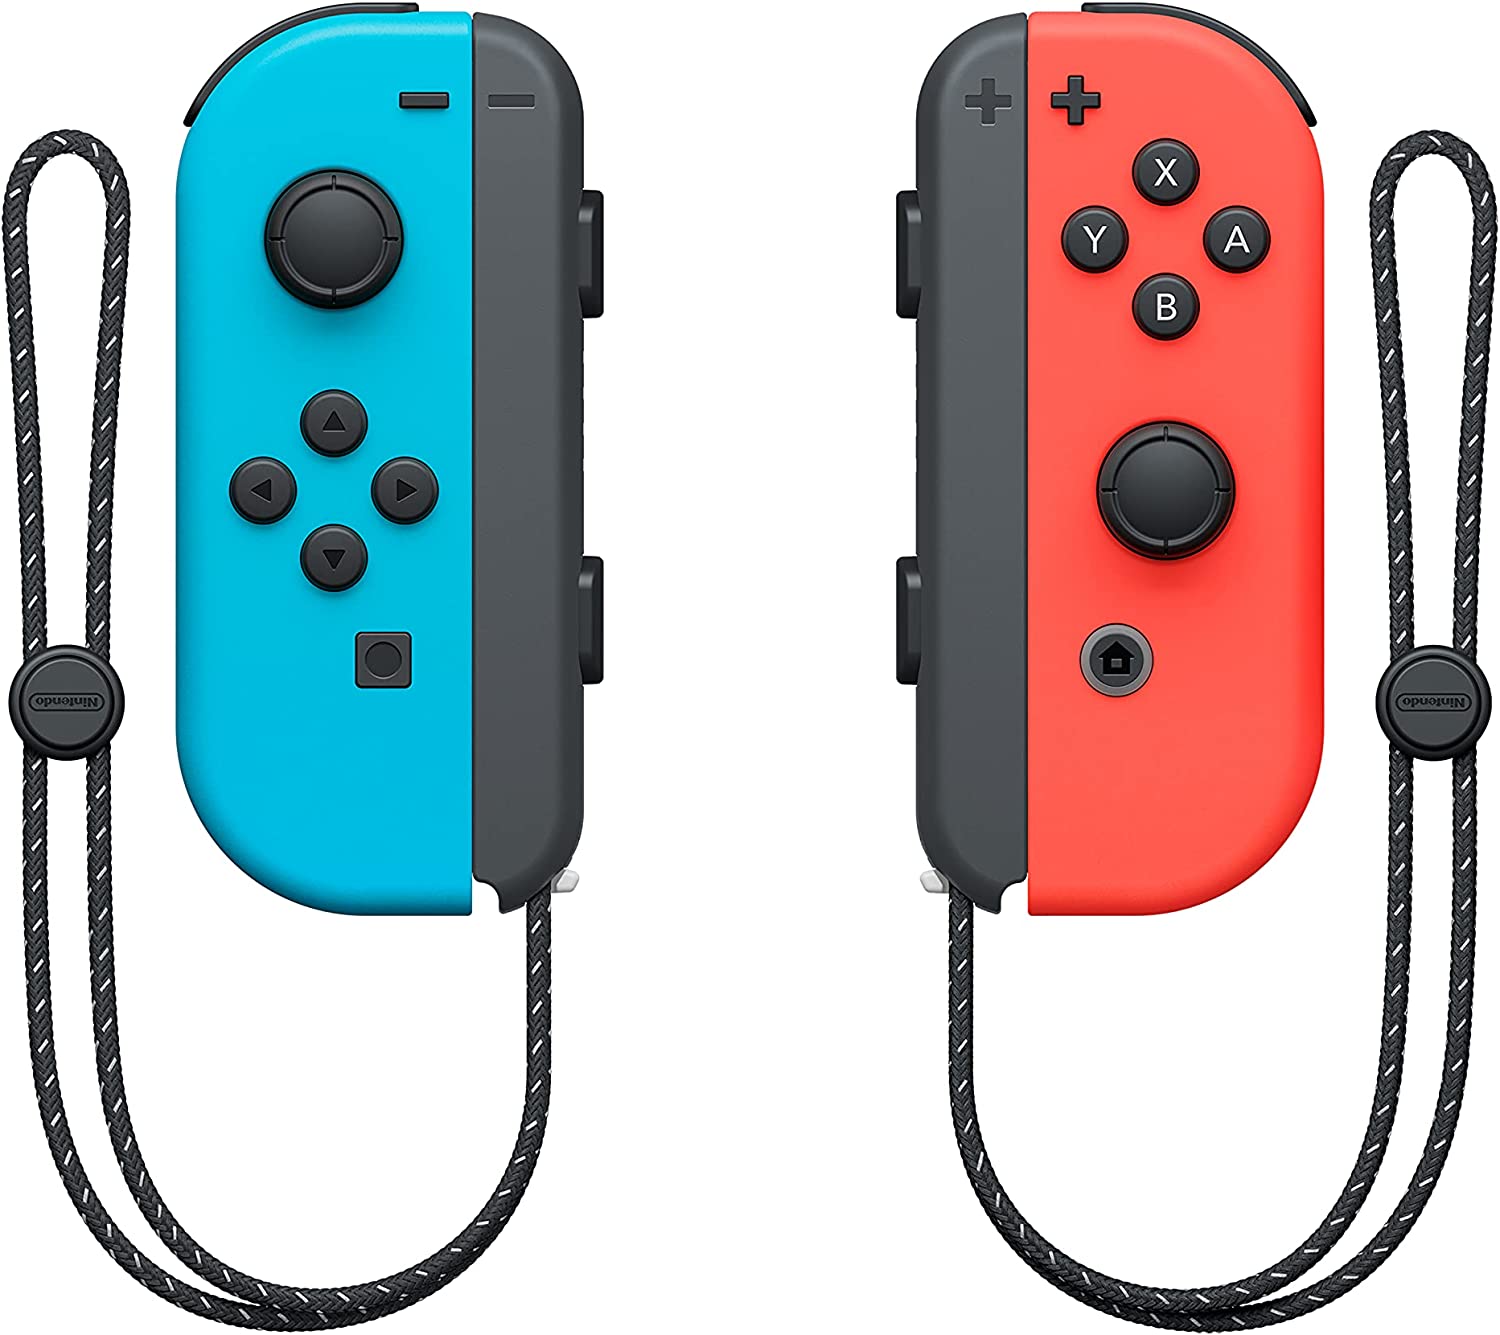 Nintendo Switch™ OLED Model - Neon Blue & Neon Red with Controller